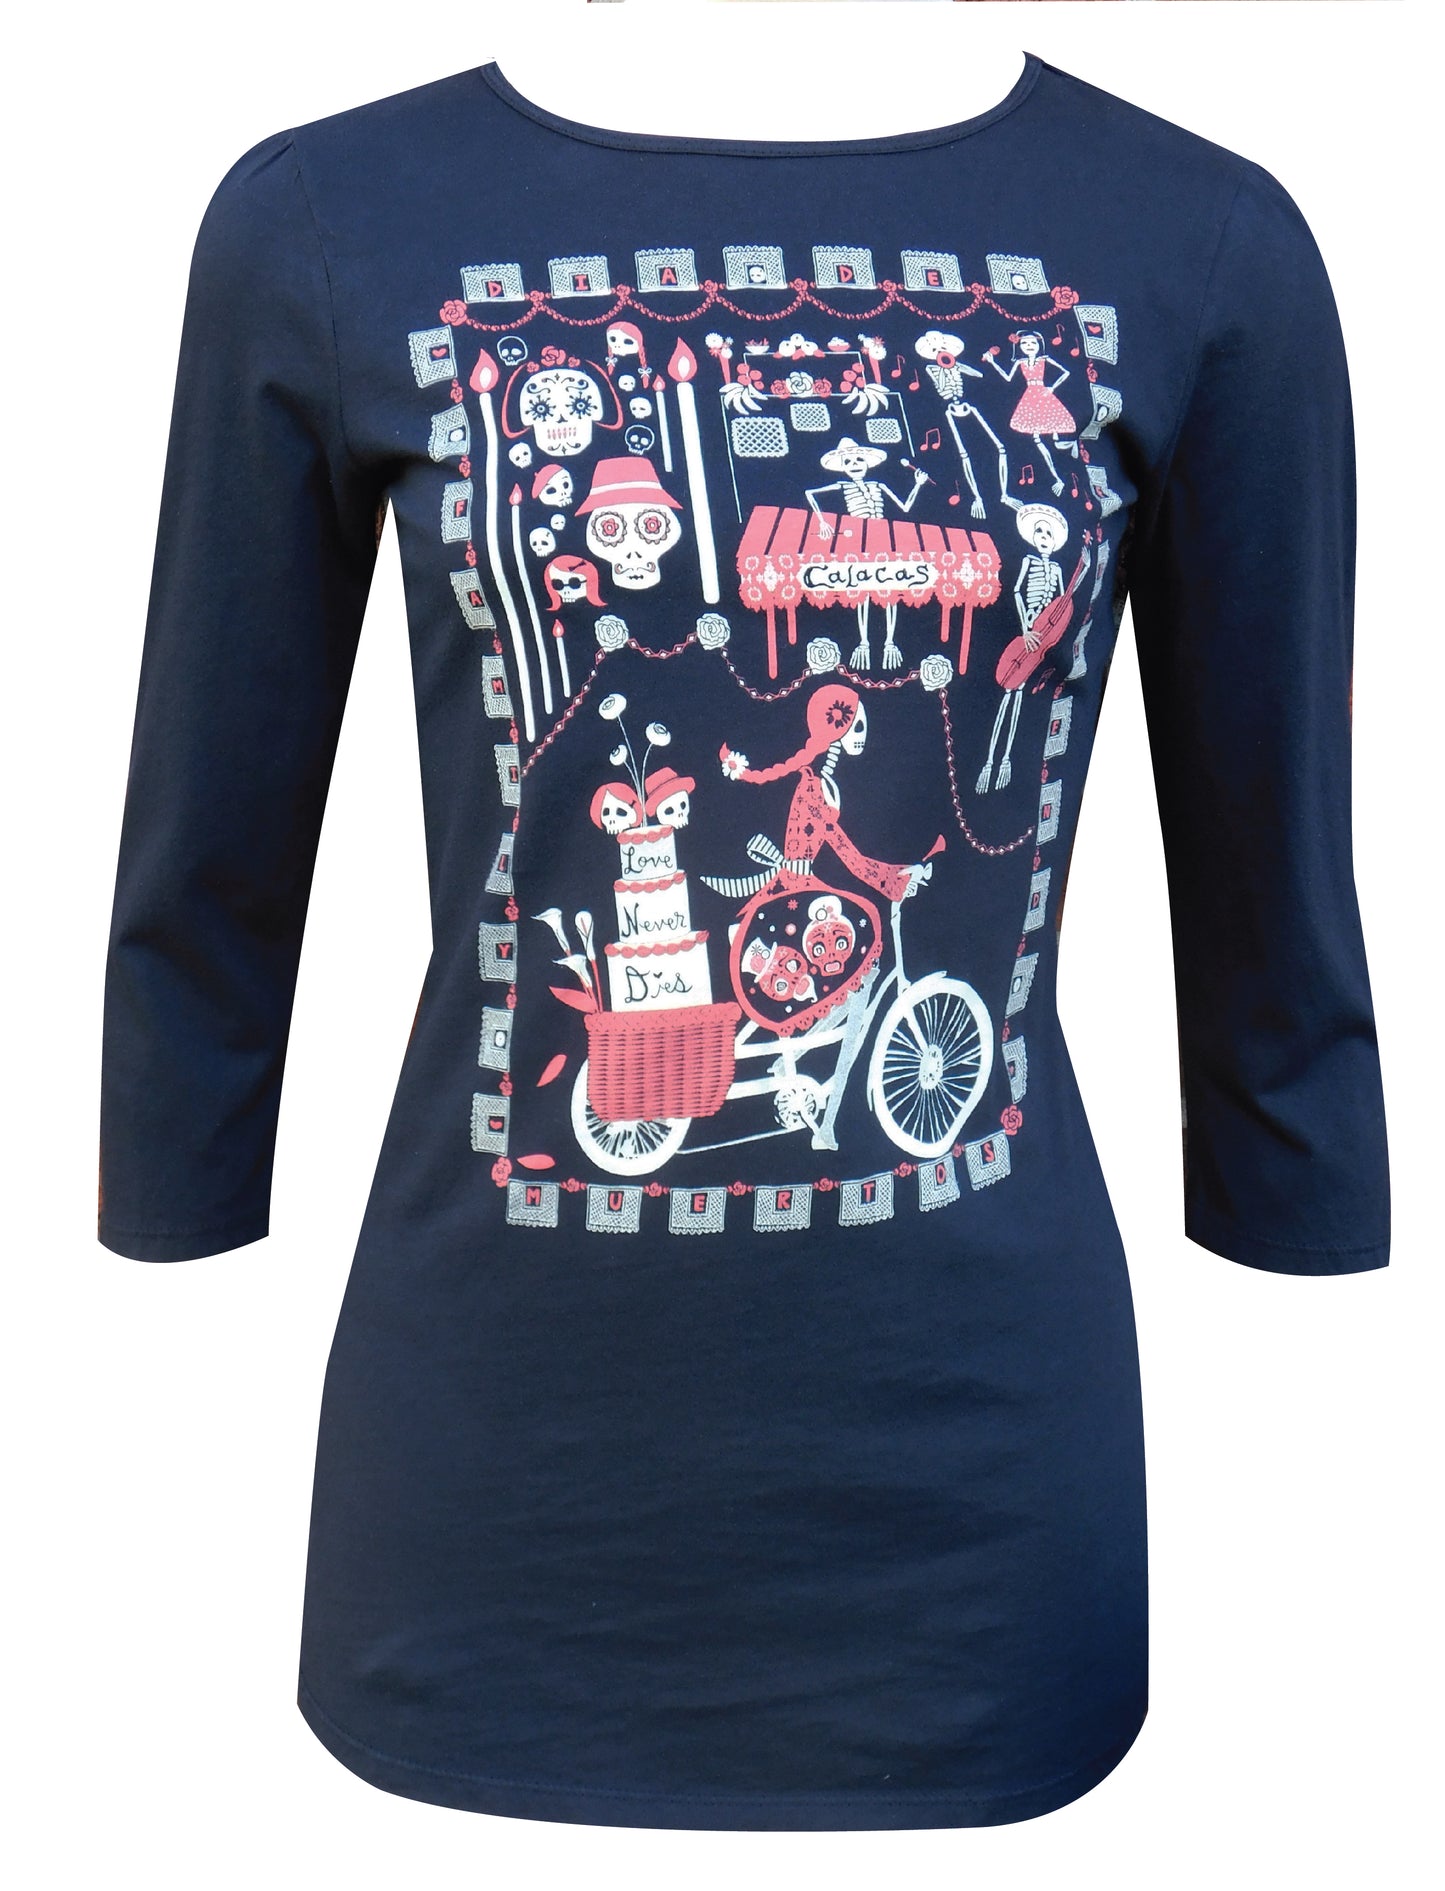 Long sleeve tee in navy with a graphic of skeletons celebrating and riding bikes